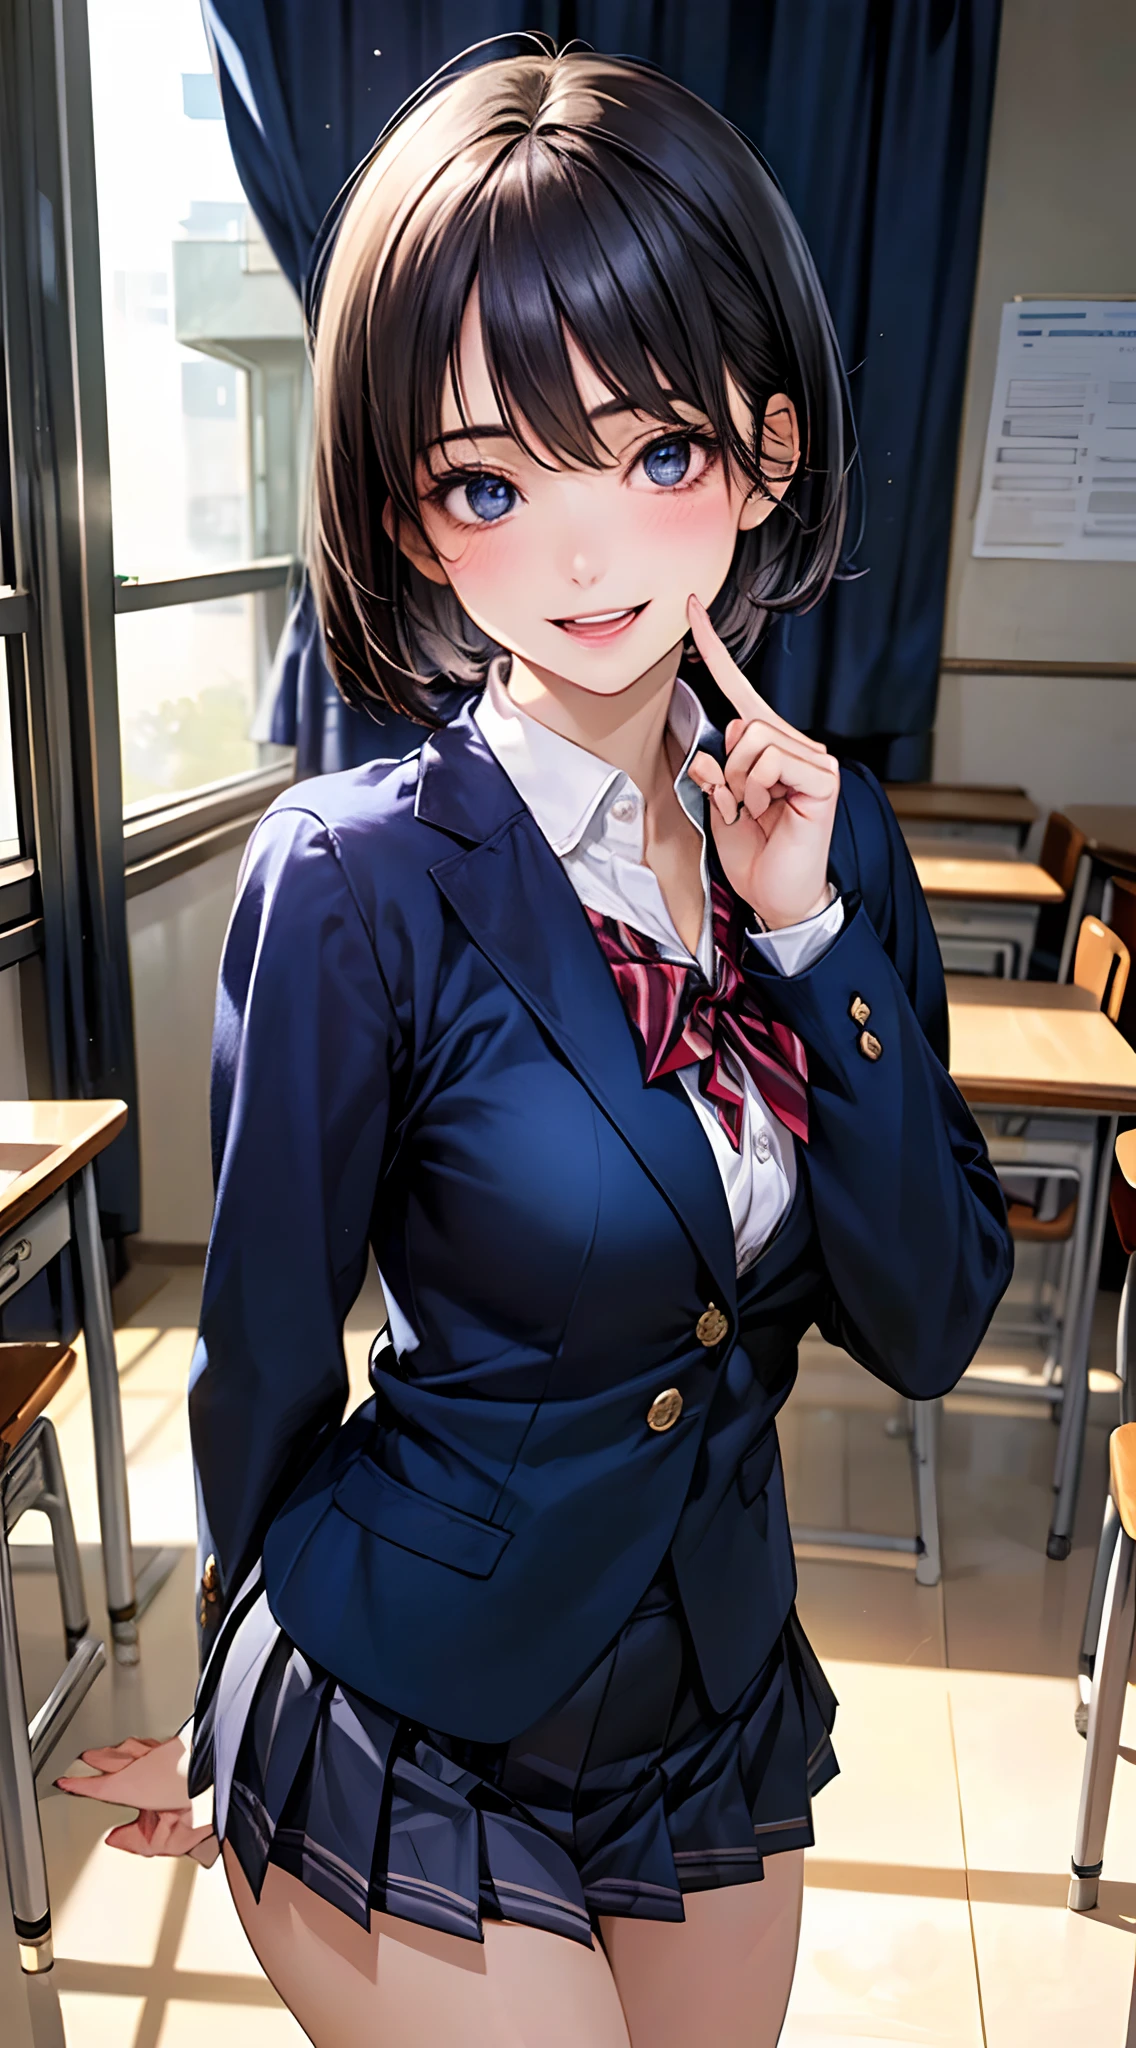 (masterpiece:1.2, top-quality), (realistic, photorealistic:1.4), beautiful illustration, NSFW, 
looking at viewer, cowboy shot, front view:0.8, 
1 girl, japanese, high school girl, black hair, (short hair:1.4), (bob hair:1.2), bangs, hair between eye, blue eyes, large breasts:1.0, (thick thighs), 
beautiful hair, beautiful face, beautiful detailed eyes, beautiful clavicle, beautiful body, beautiful chest, beautiful thigh, beautiful legs, beautiful fingers, 
(beautiful scenery), dawn, bright and refreshing classroom, desks, chairs, curtains, 
((navy blazer, pleated miniskirt, navy blue socks, private school uniform:1.2)), white panties, 
(swollen), ((seductive posture: 1.2, attractiveness: 1.2)), (idle),
(erotic,sexy, upper eyes, smiling smile: 1.2), shiny skin, open mouth, (put her finger on one's lips), 
perfect face, cute and symmetrical face, natural side lighting, movie lighting),